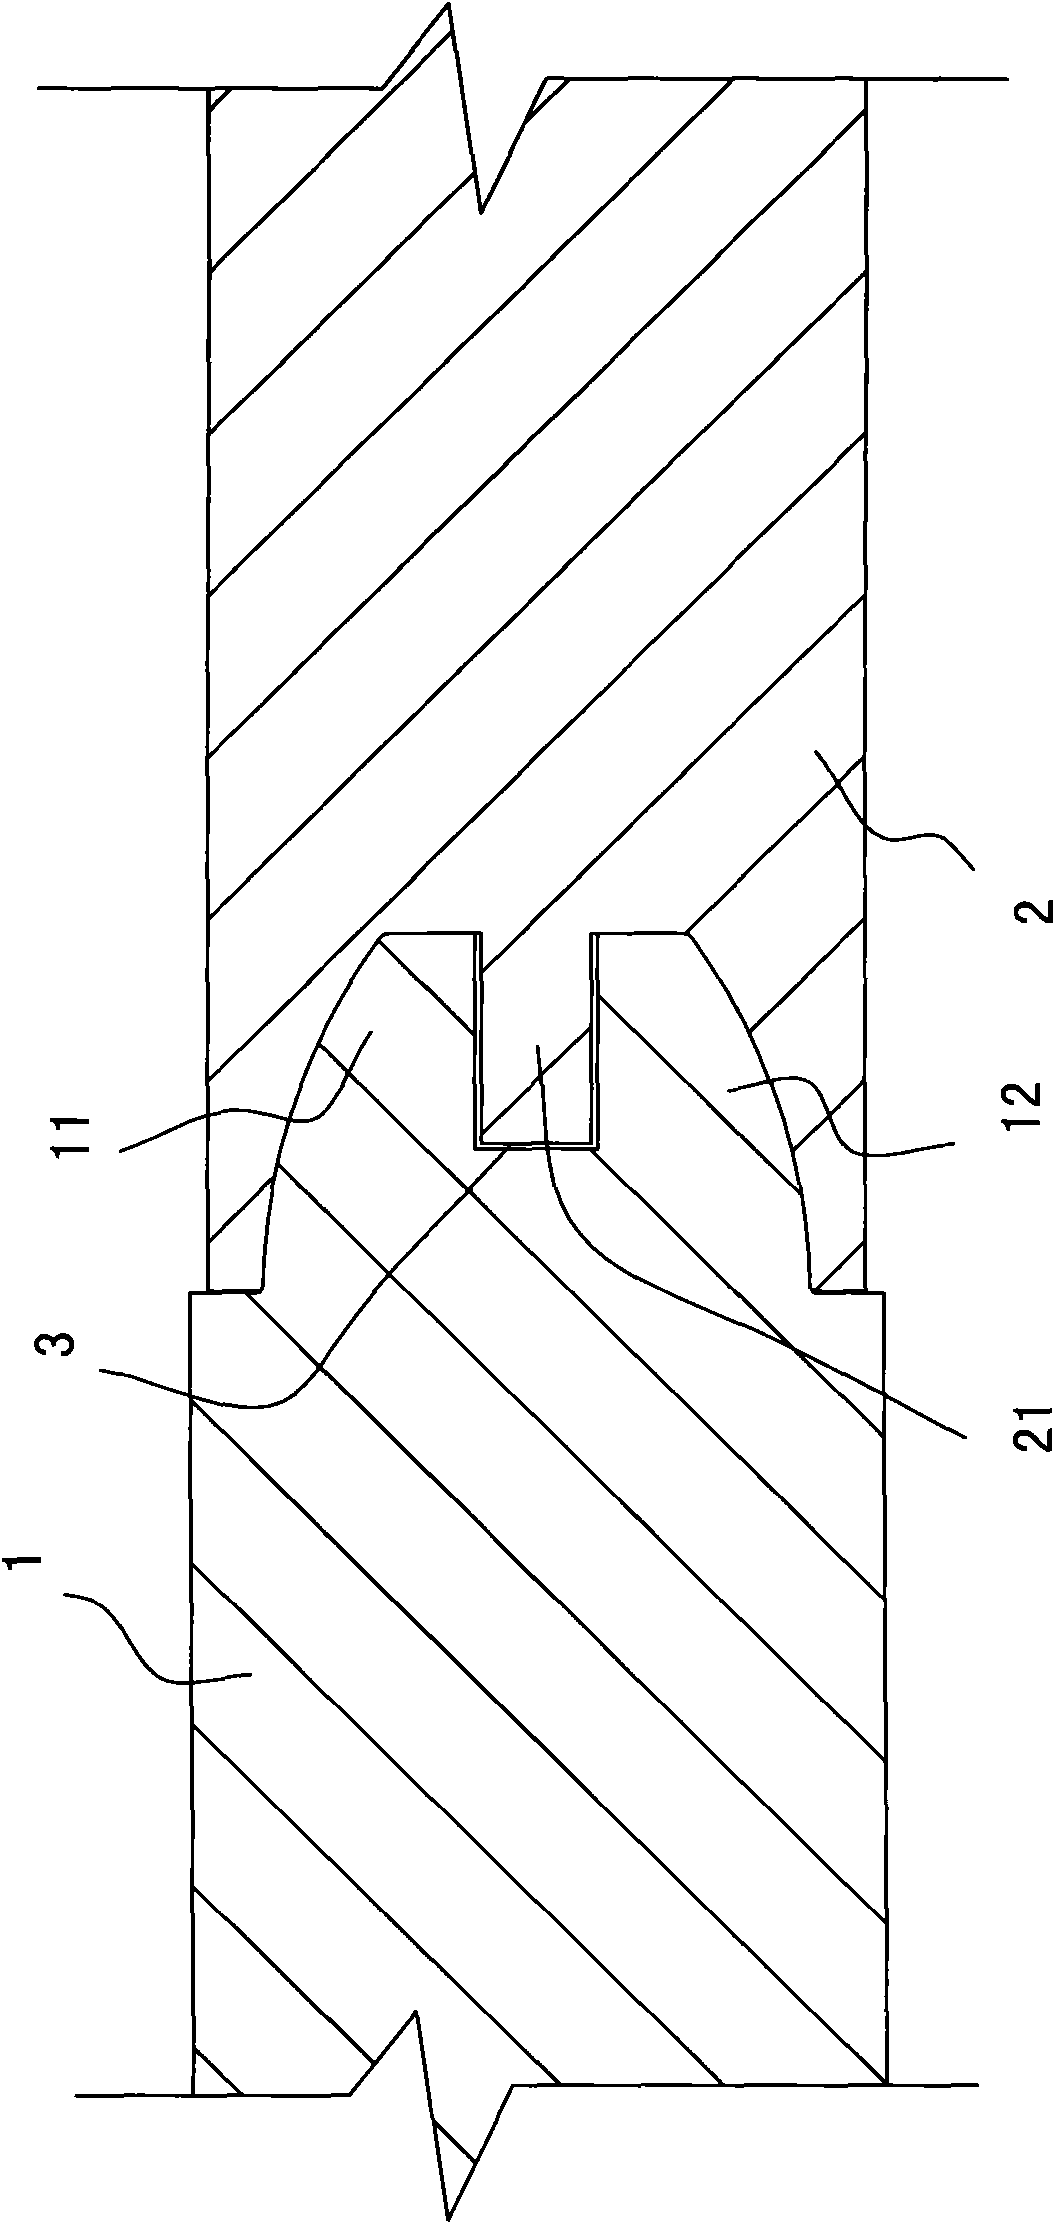 Slot mortise coupling structure